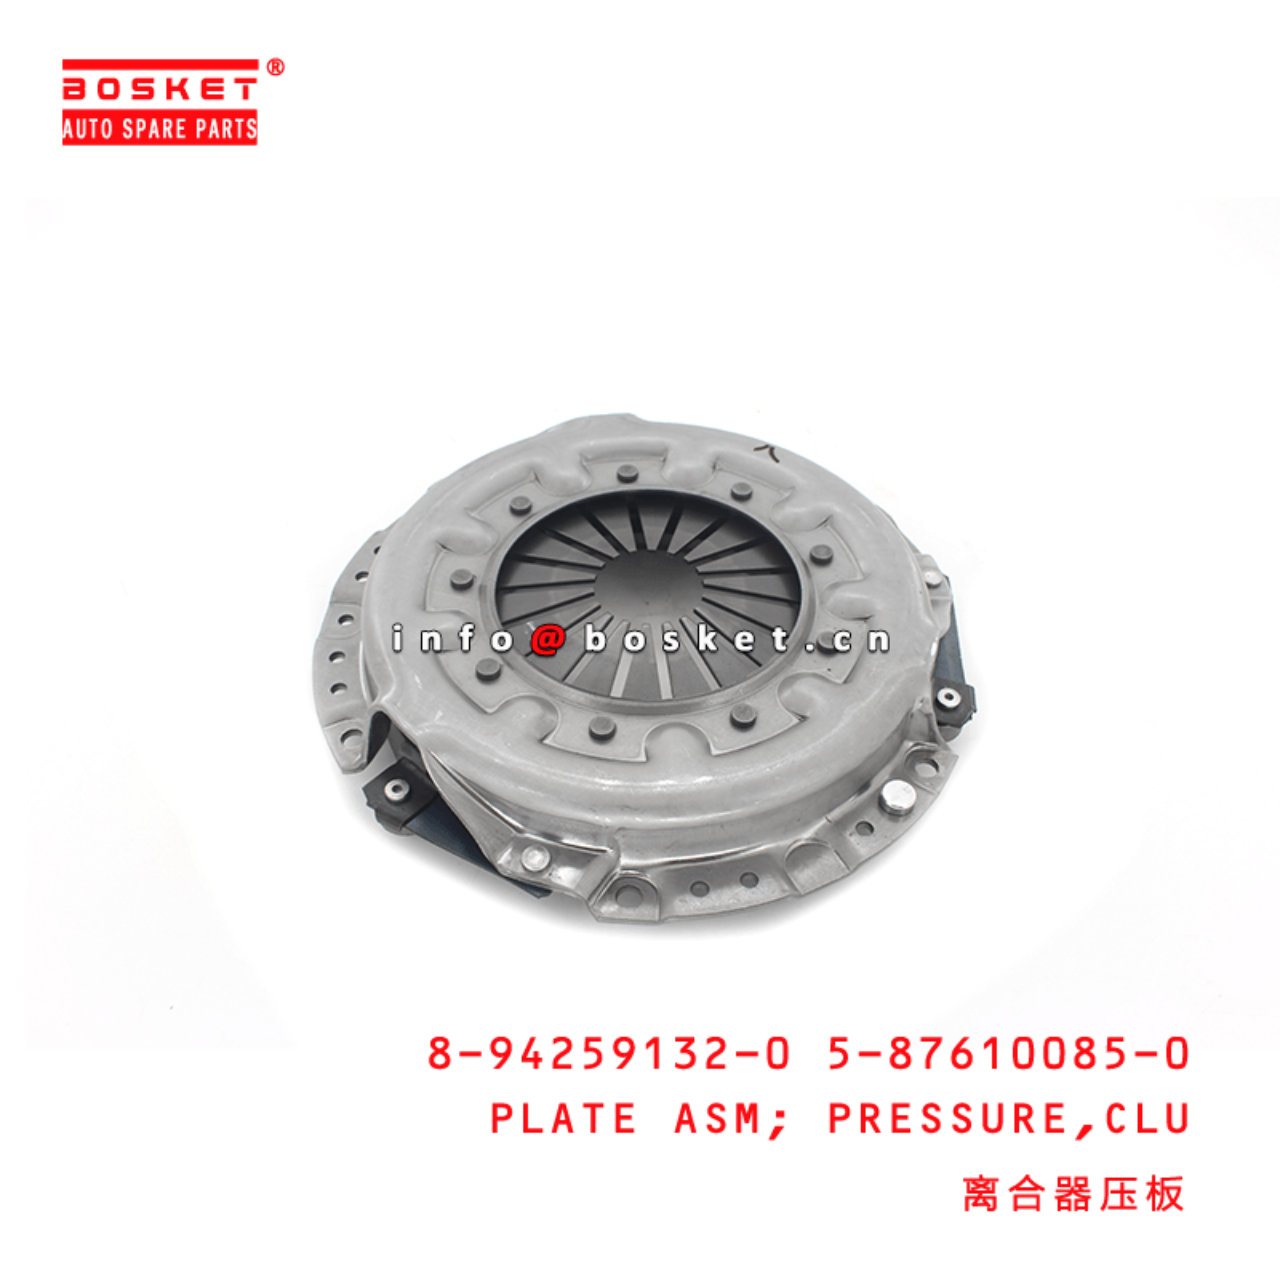 8-94259132-0 5-87610085-0 Clutch Pressure Plate Assembly 8942591320 5876100850 Suitable for ISUZU NH